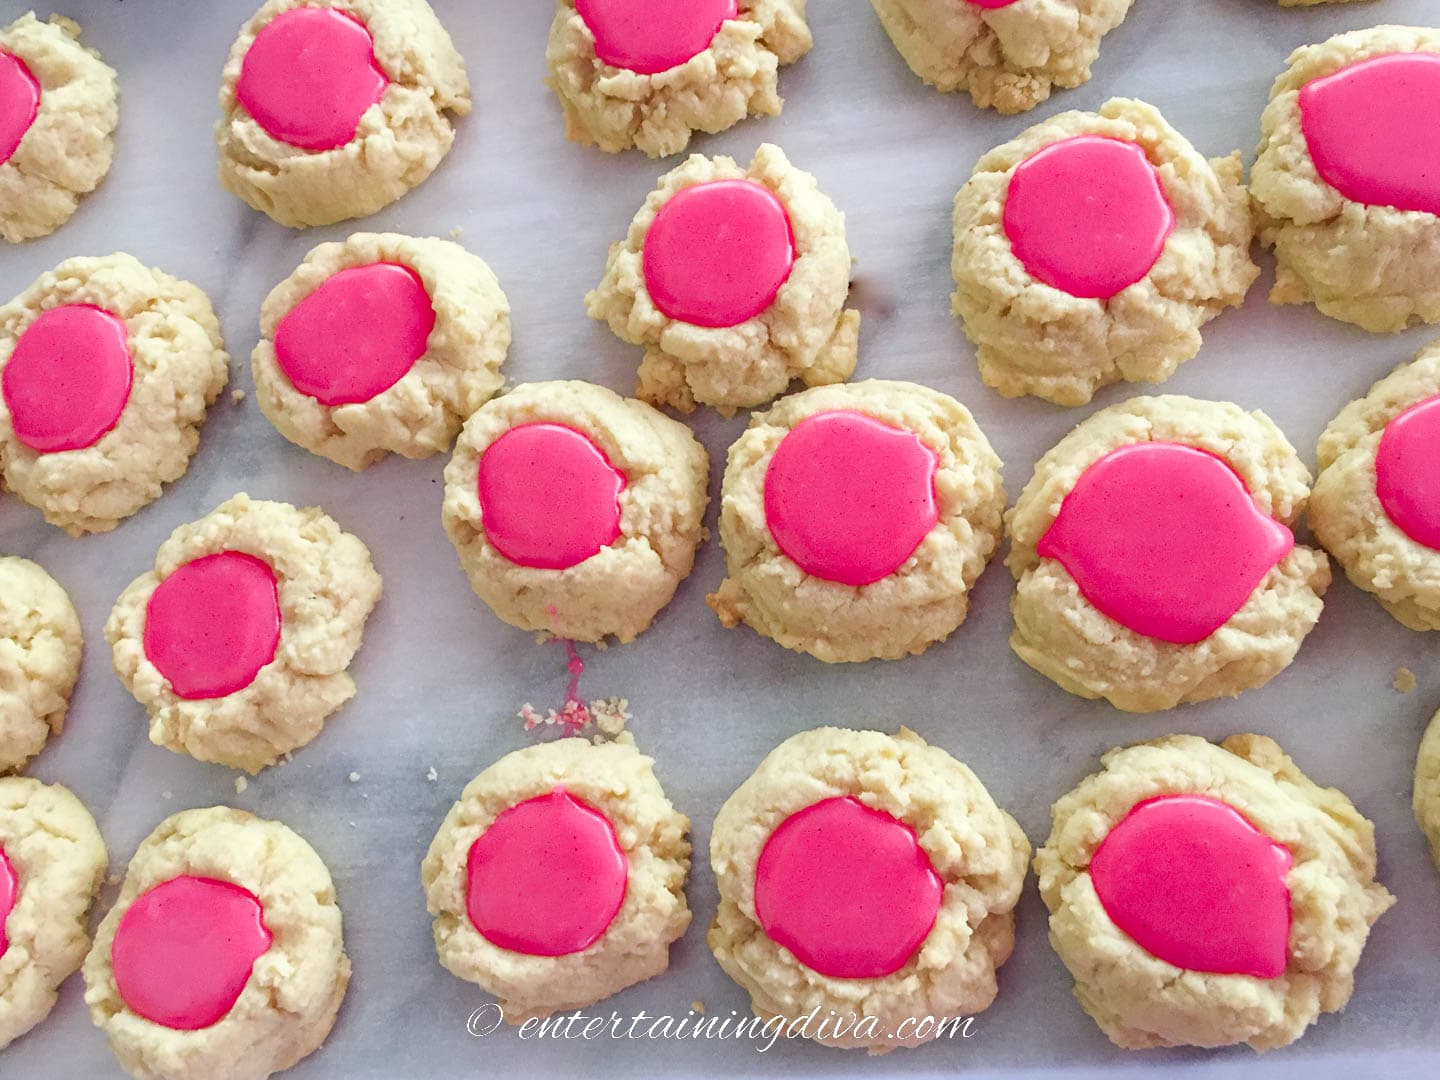 thumbprint cookies filled with pink white chocolate peppermint ganache filling